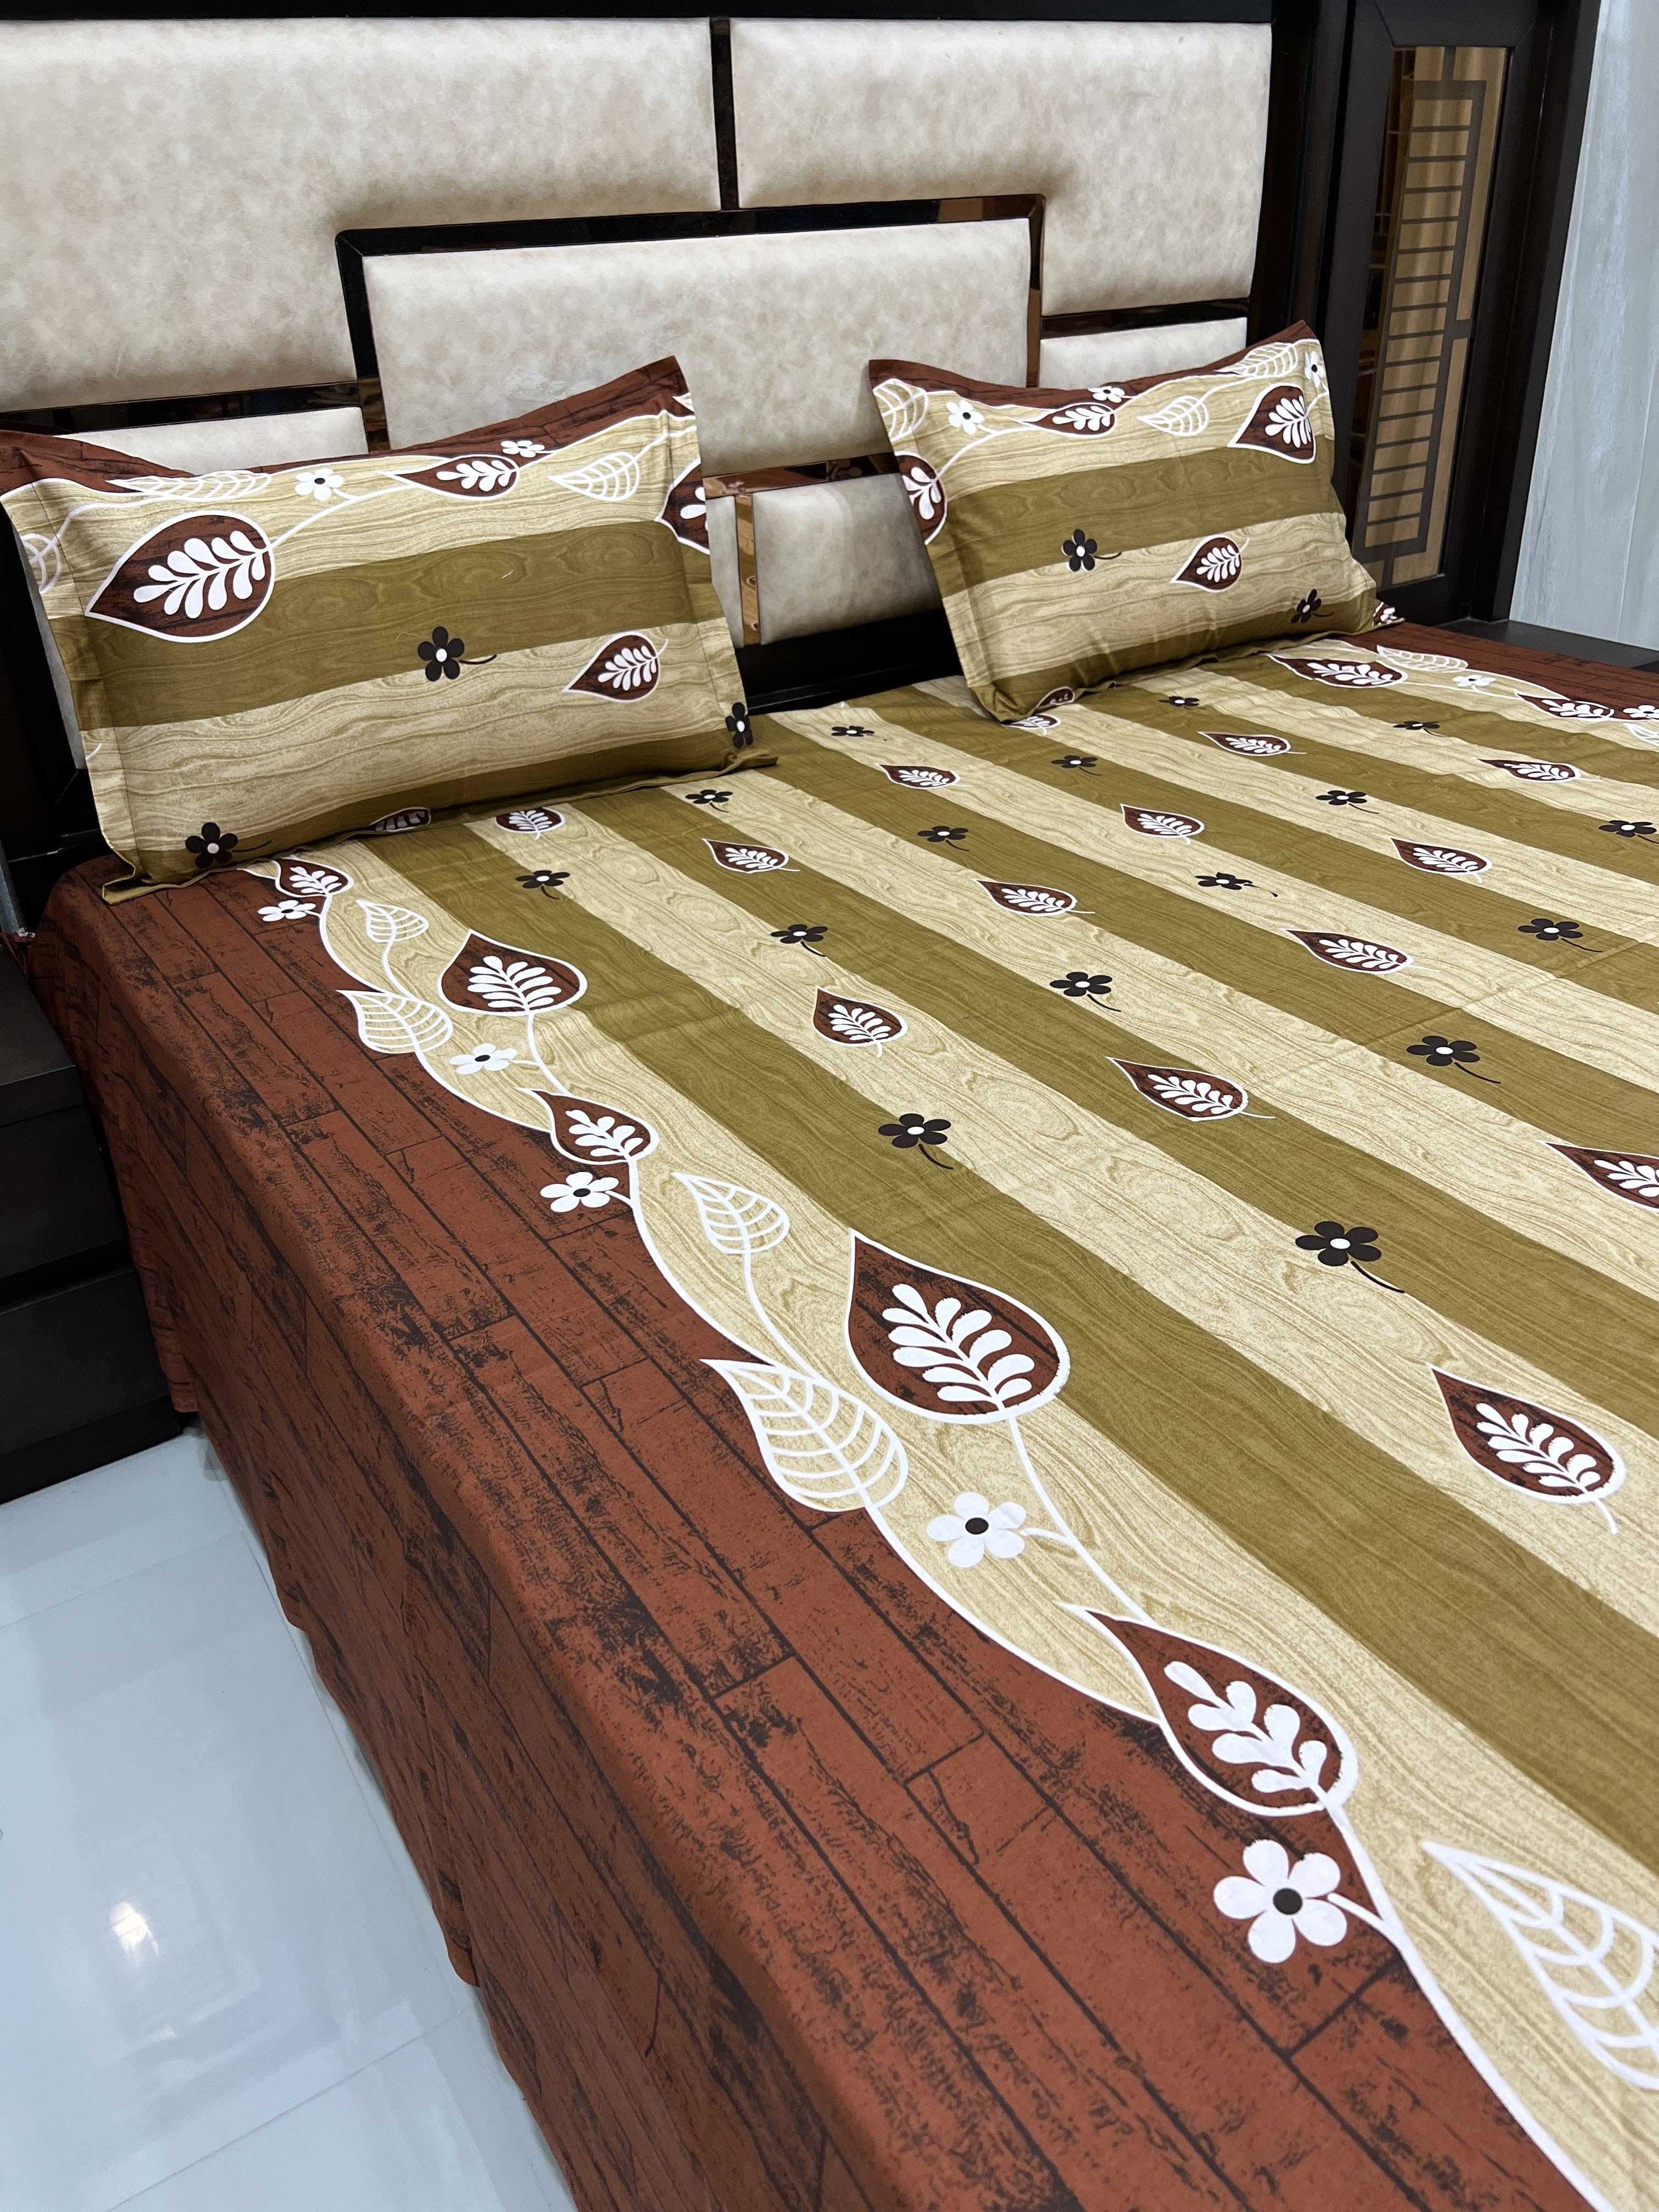 Velar Sib Collection Pure Decor Pure Cotton 400 TC King Size Double Bedsheet (274X274) with Two Pillow Covers (50X76)